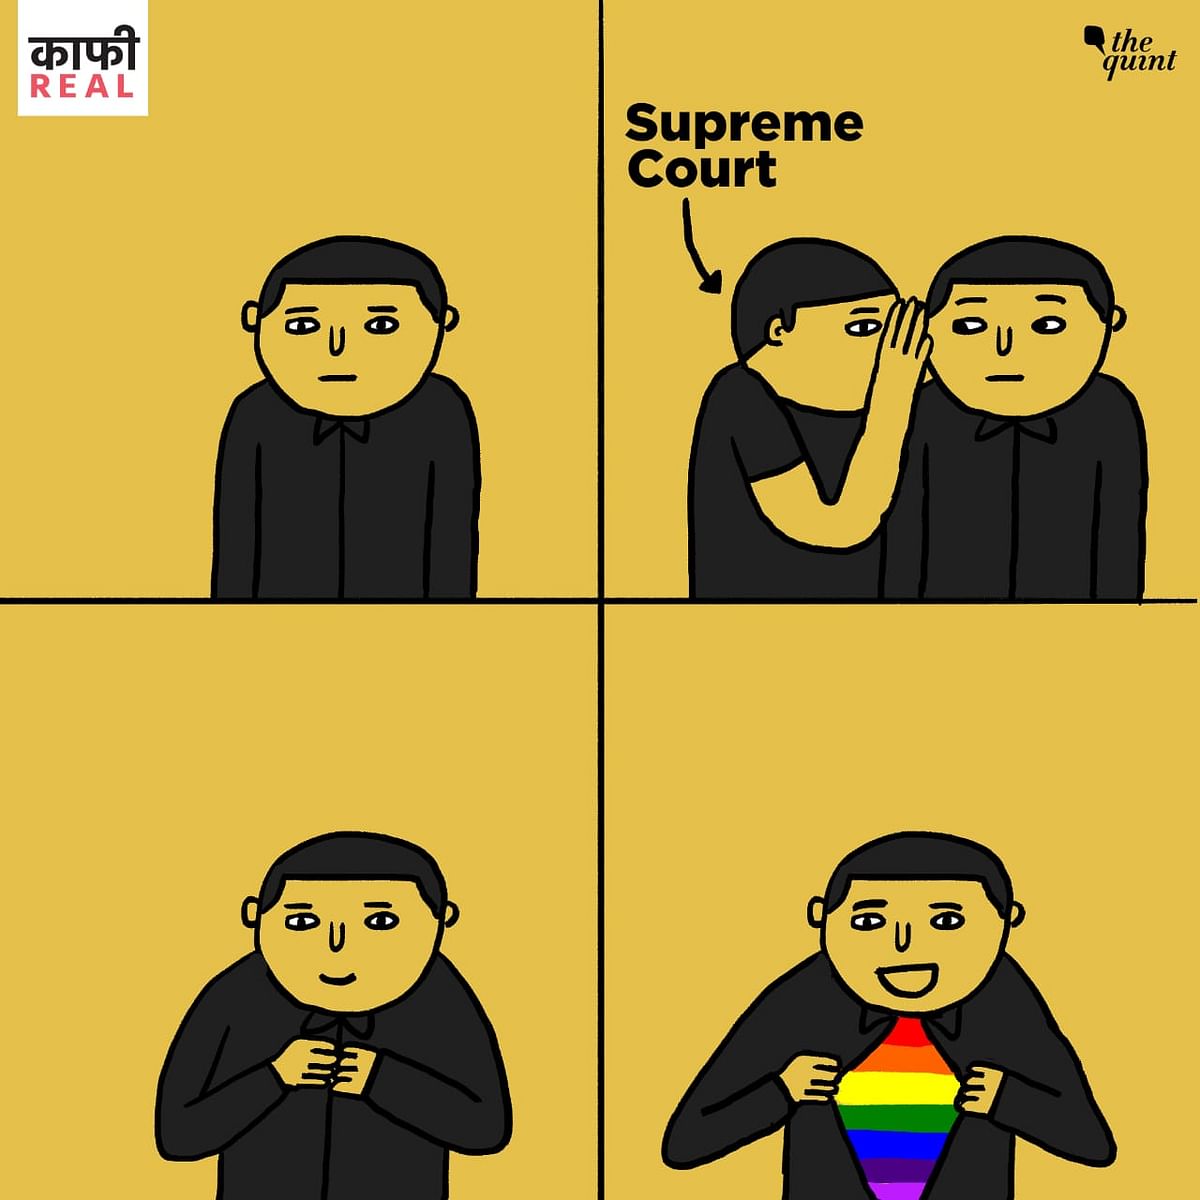 Kaafi Real Cartoon on #Section377: SC partially read down the law which criminalised consensual homosexual sex.